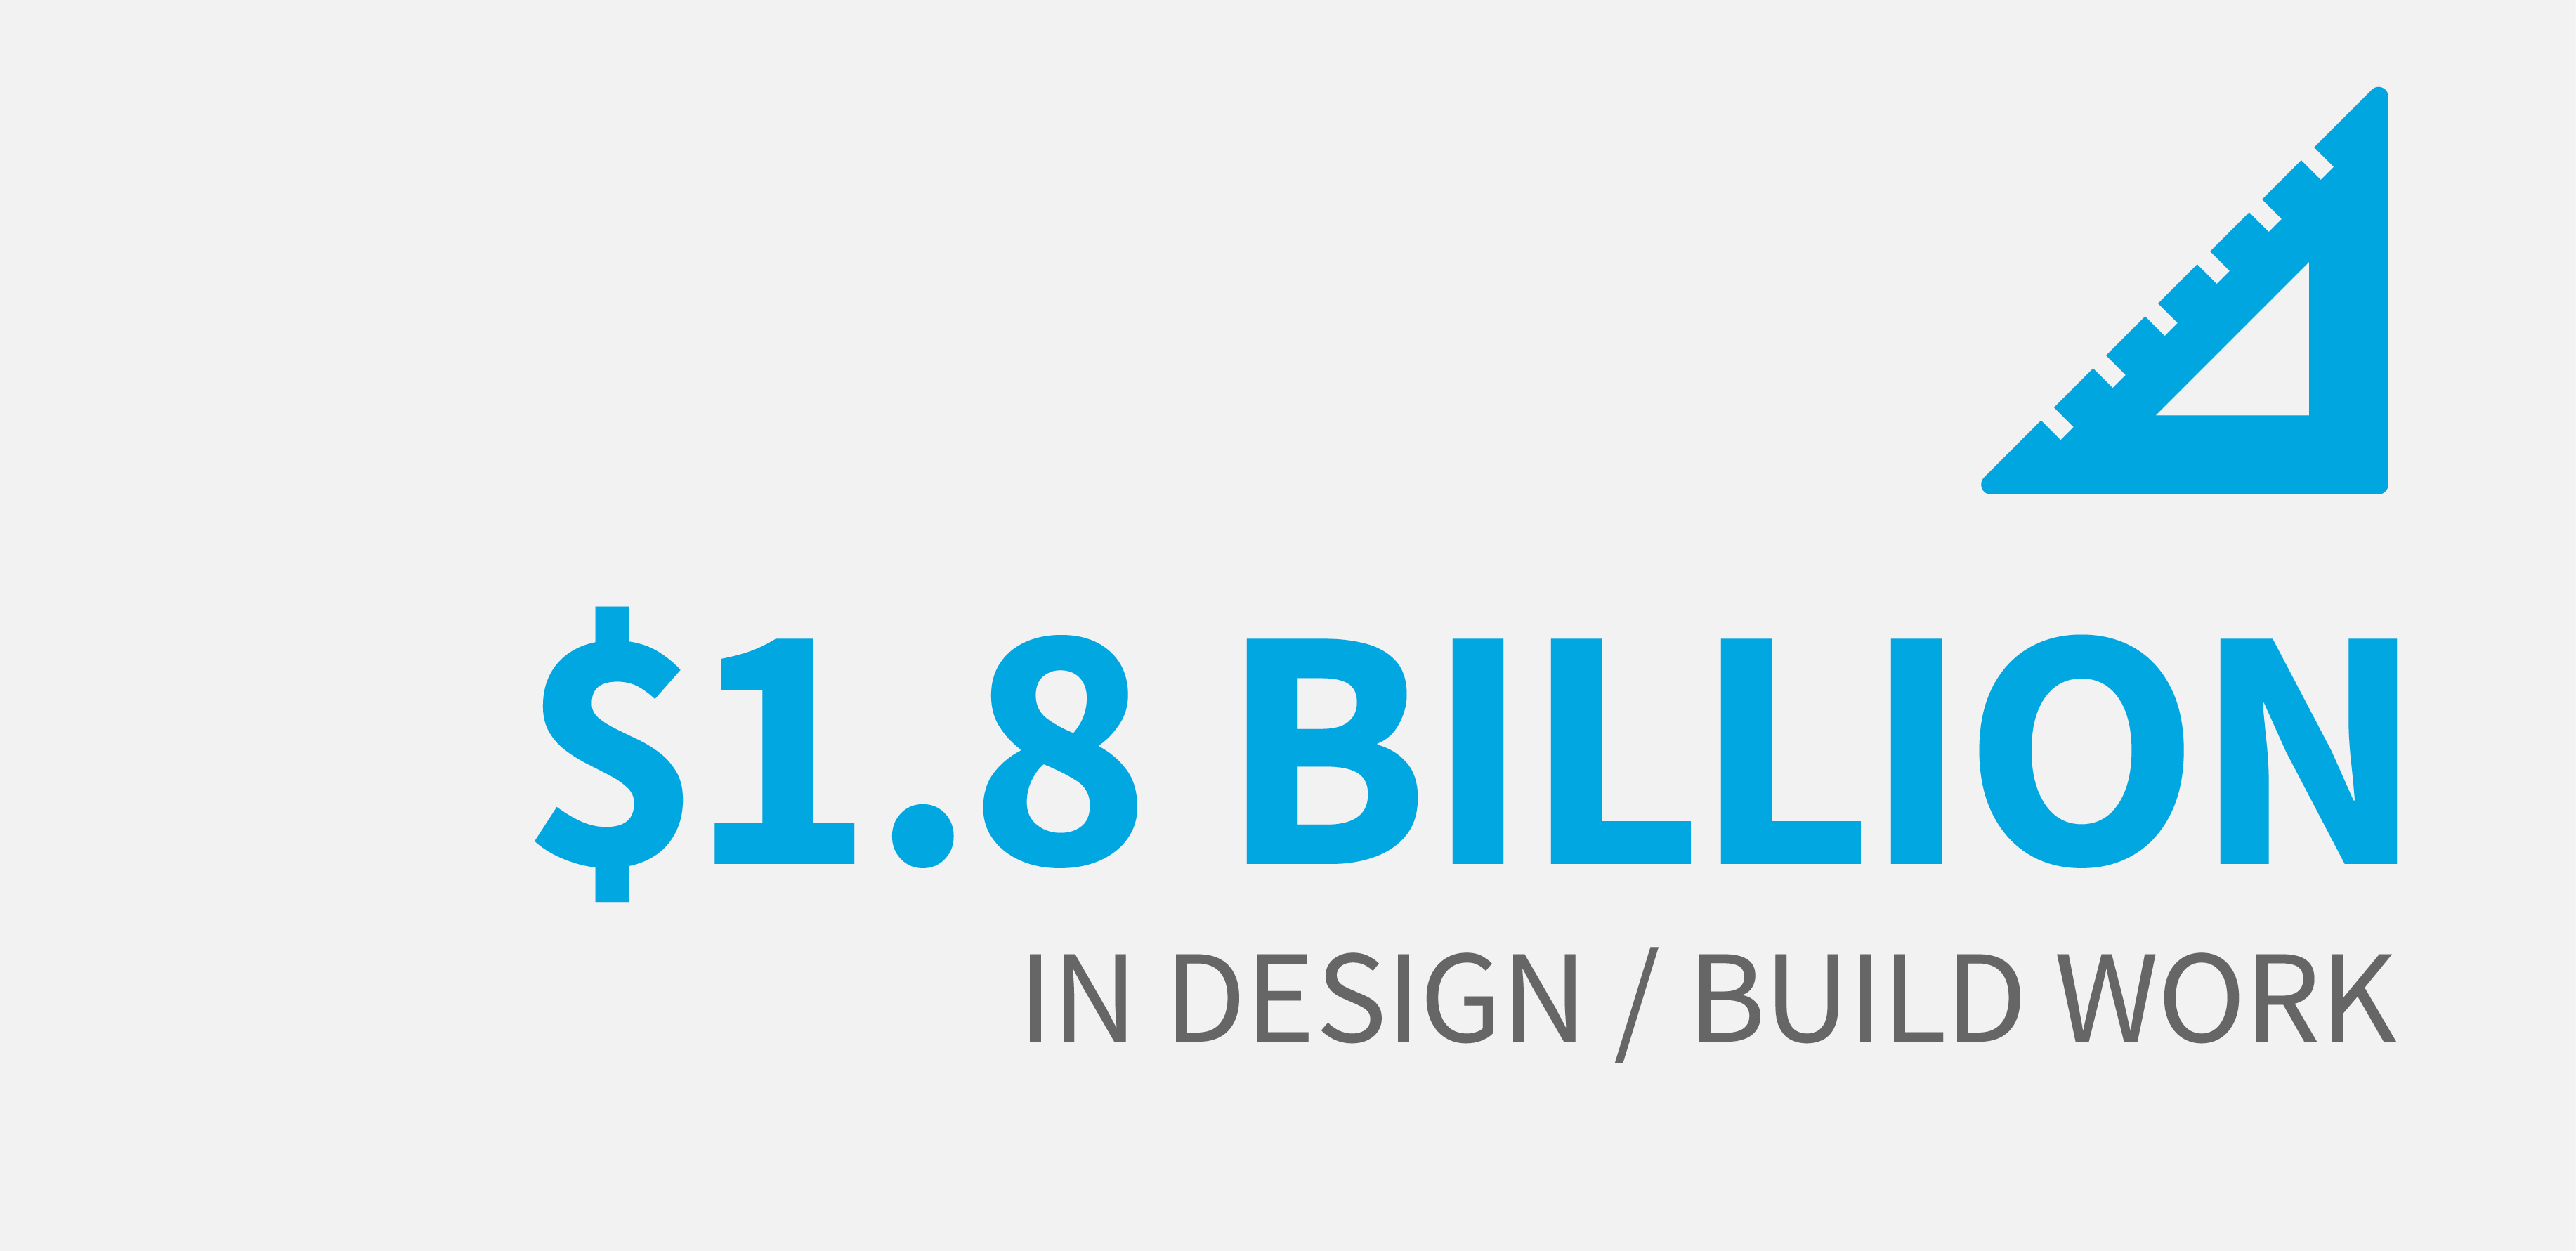 CBG has completed over $1.8 billion in design/build work.